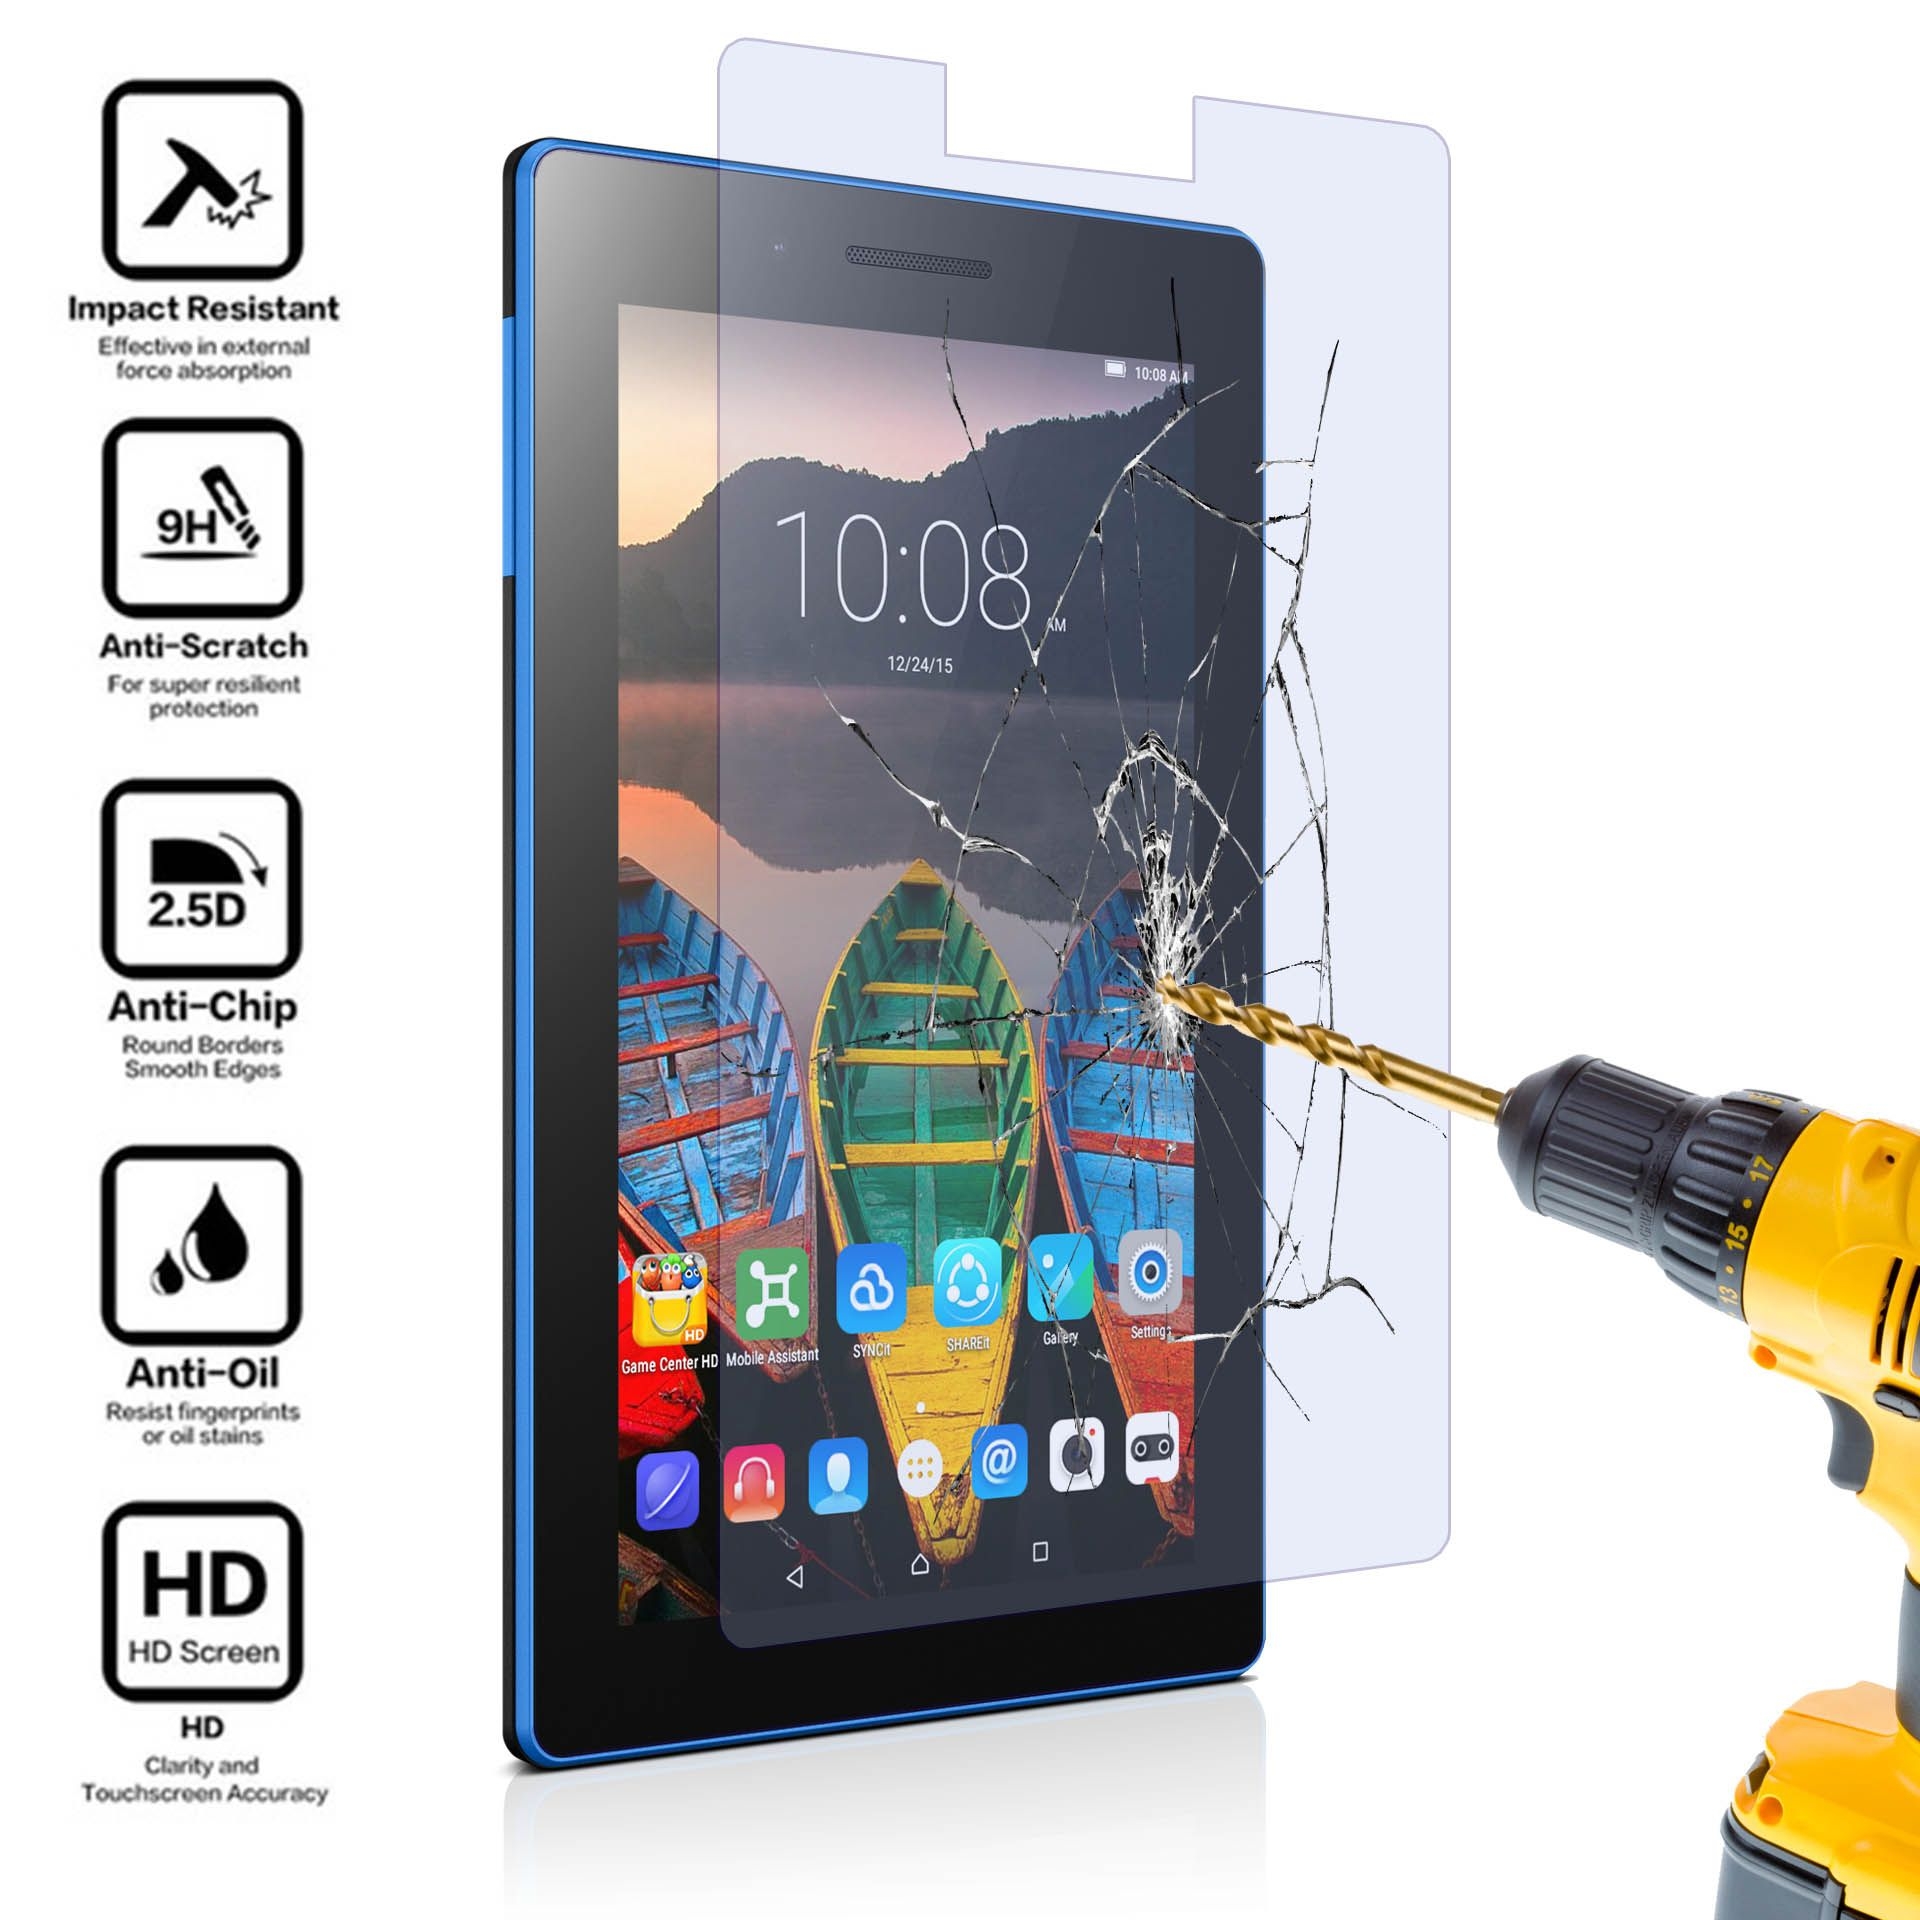 Tempered glass screen protector for tablets – Apple iPad Air 1 / 2, Pro 9.7 and 2017 iPad